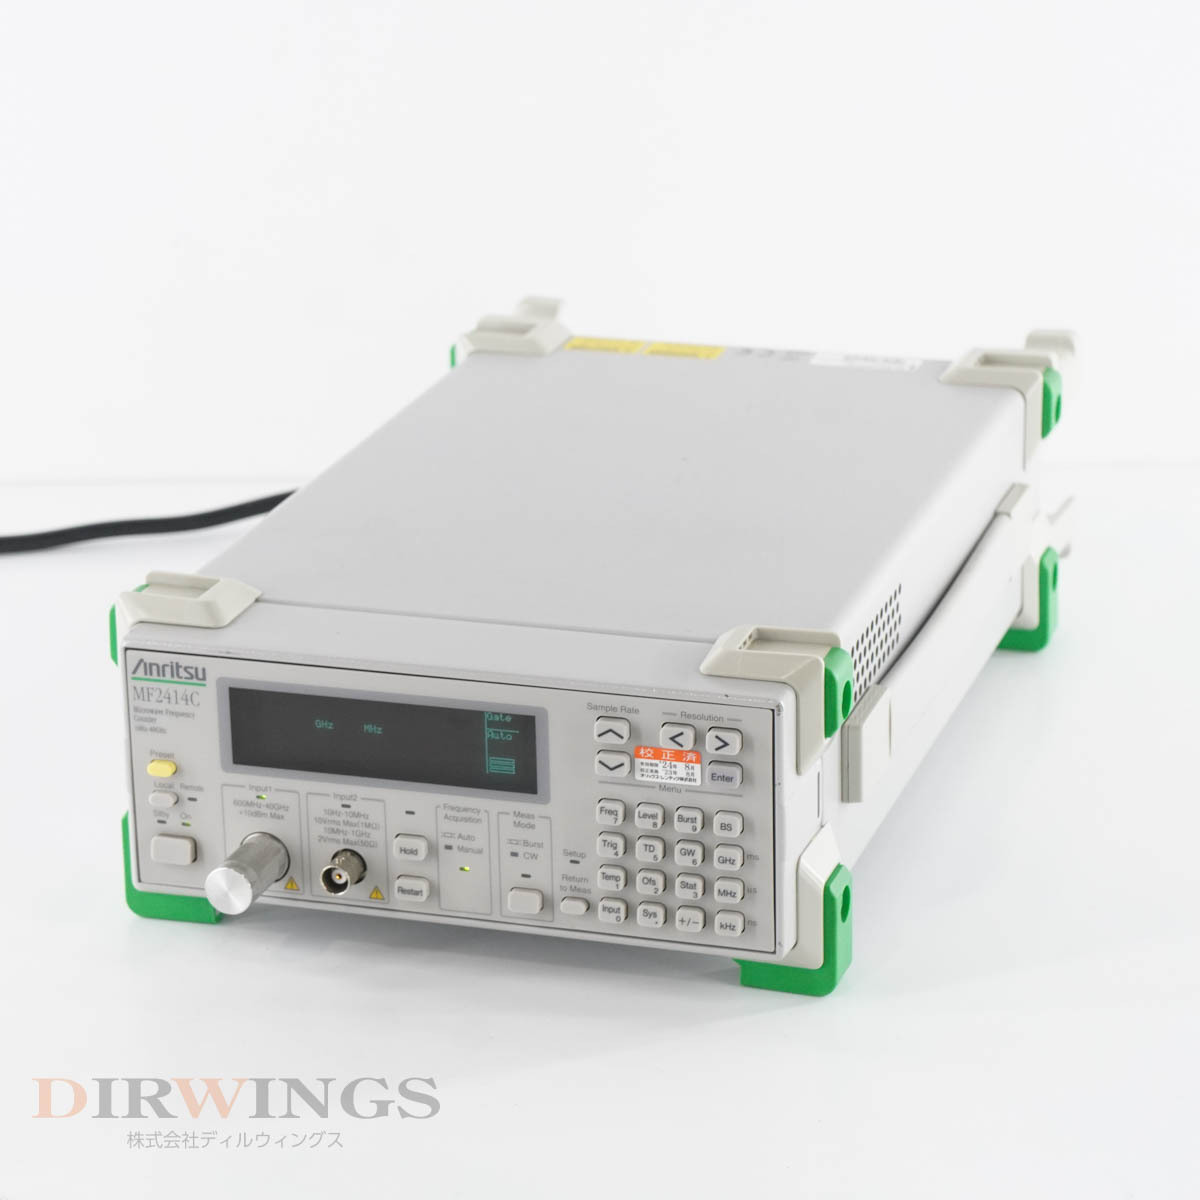 [JB] guarantee none MF2414C Anritsu 10Hz-40GHz Anne litsuMicrowave Frequency Counter frequency counter micro wave fli ticket si...[05890-0047]